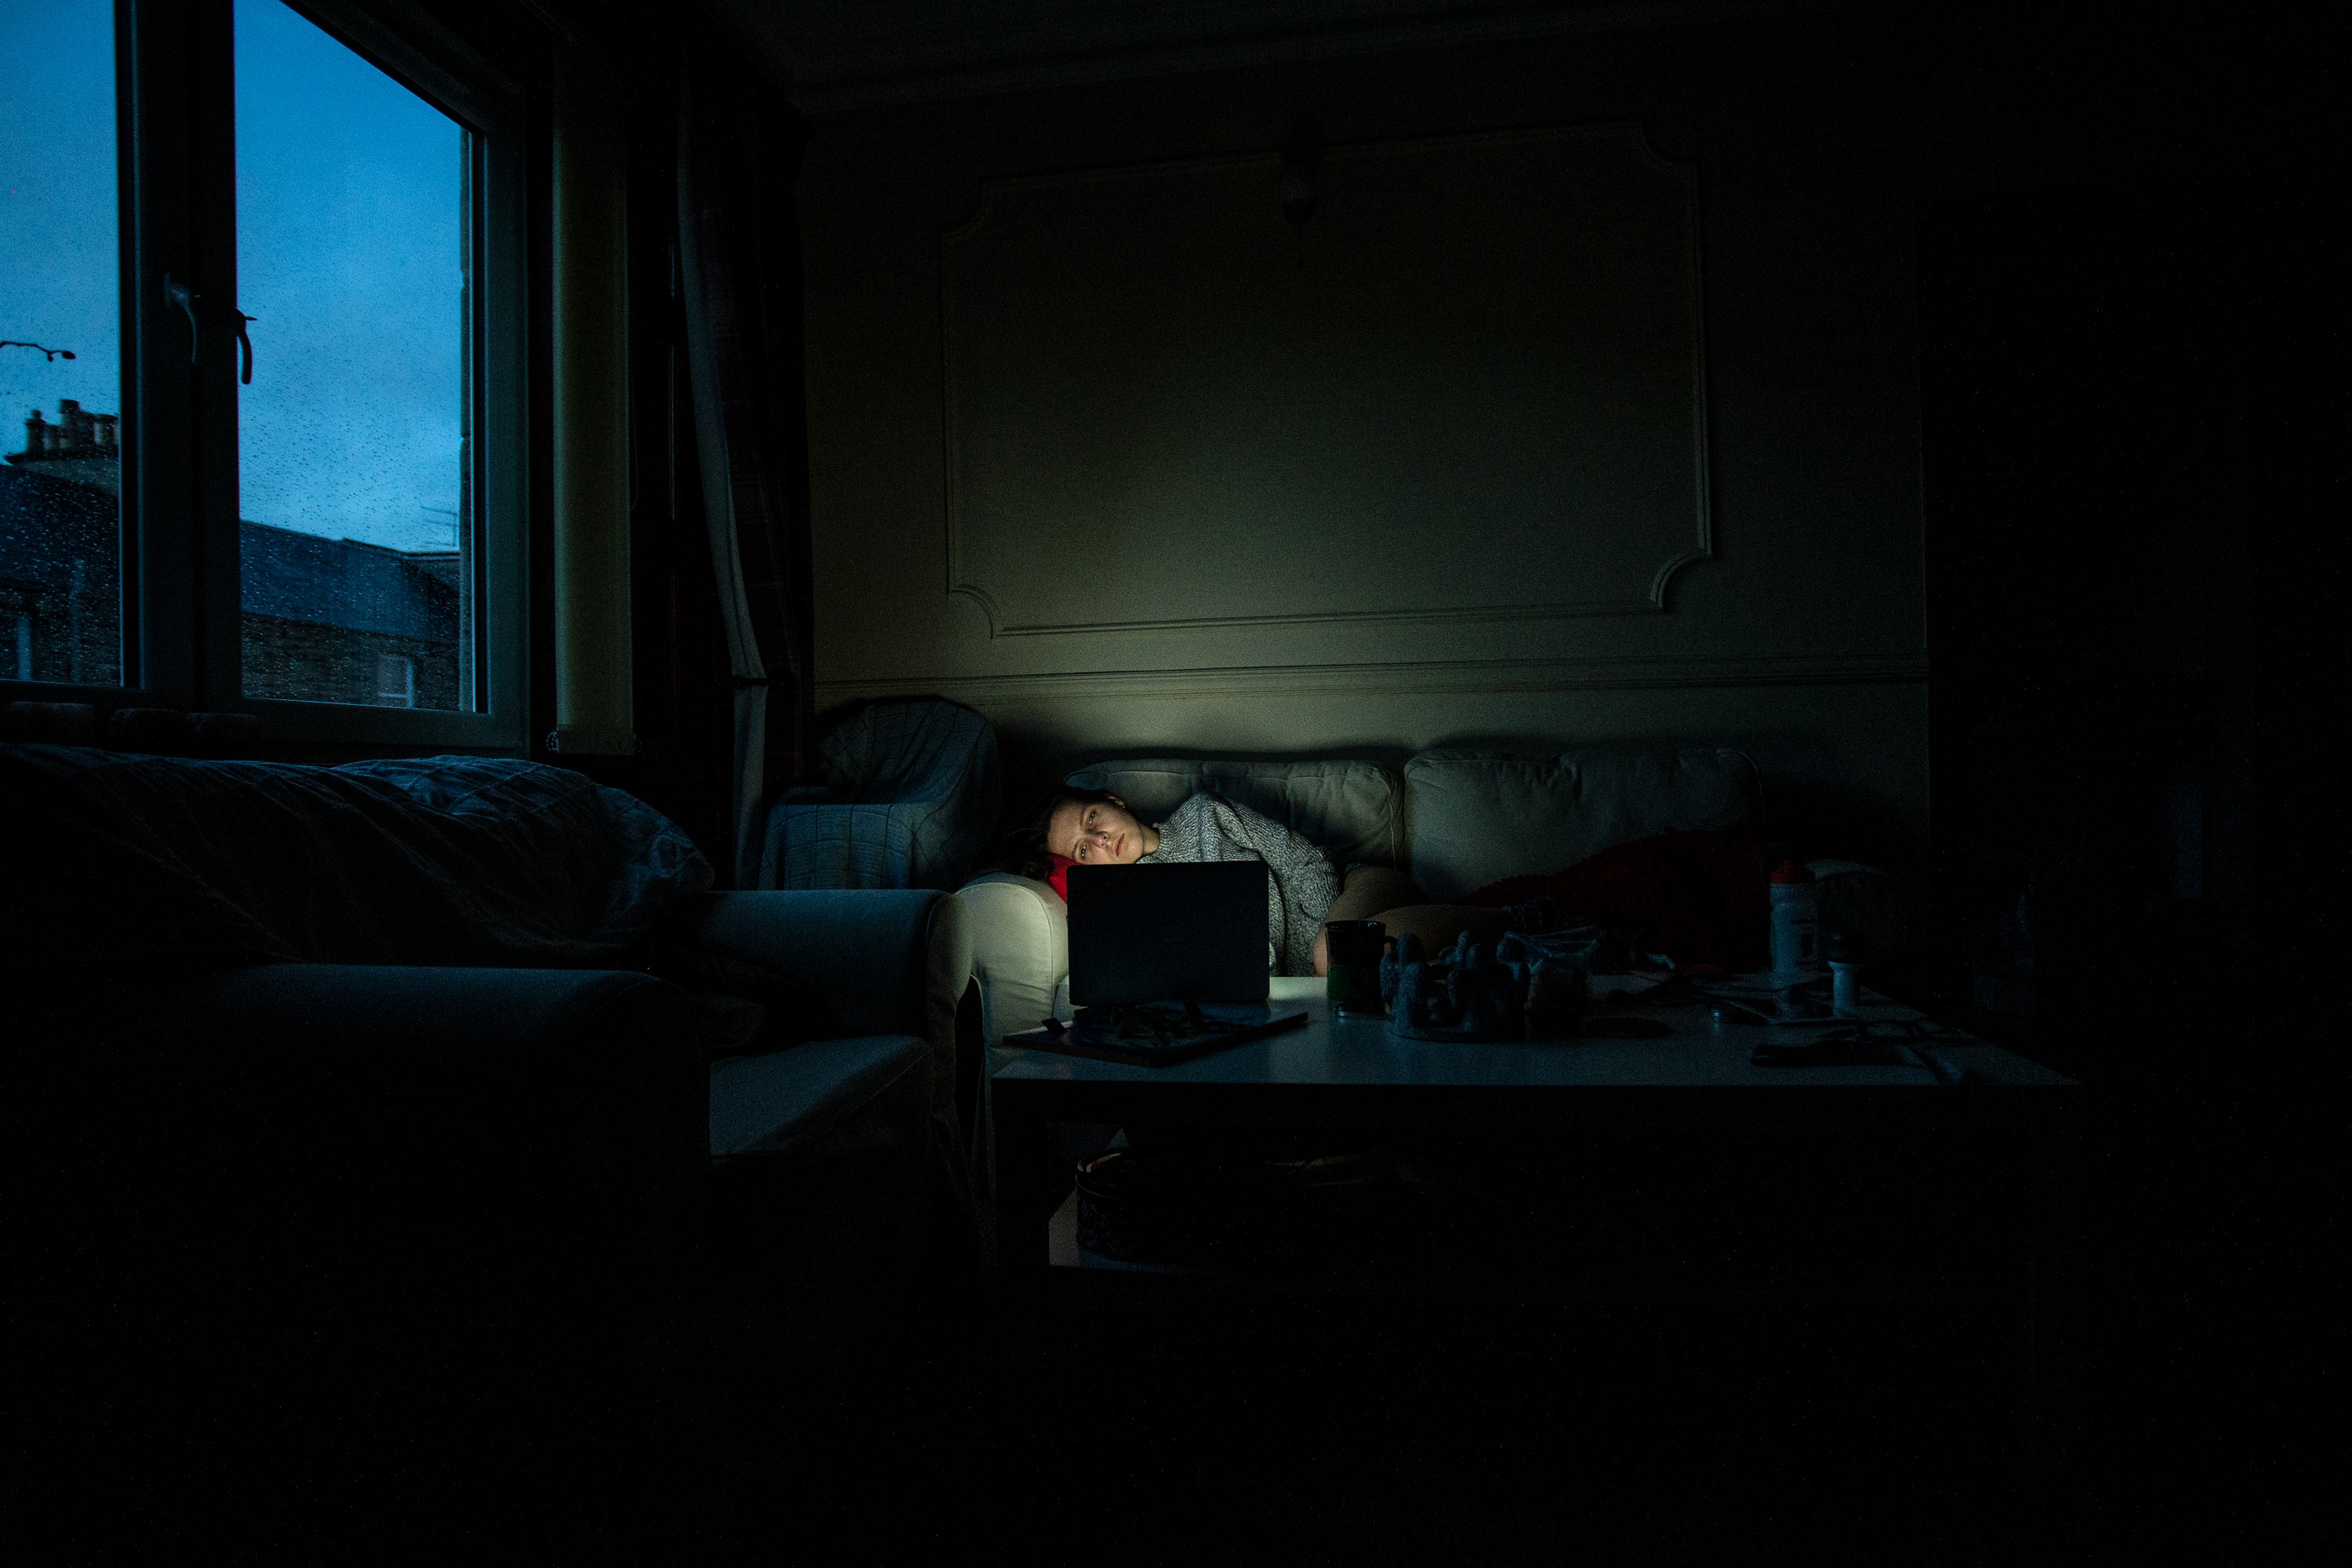 A self-portrait of the photographer laying on a sofa in a dark room watching a laptop.